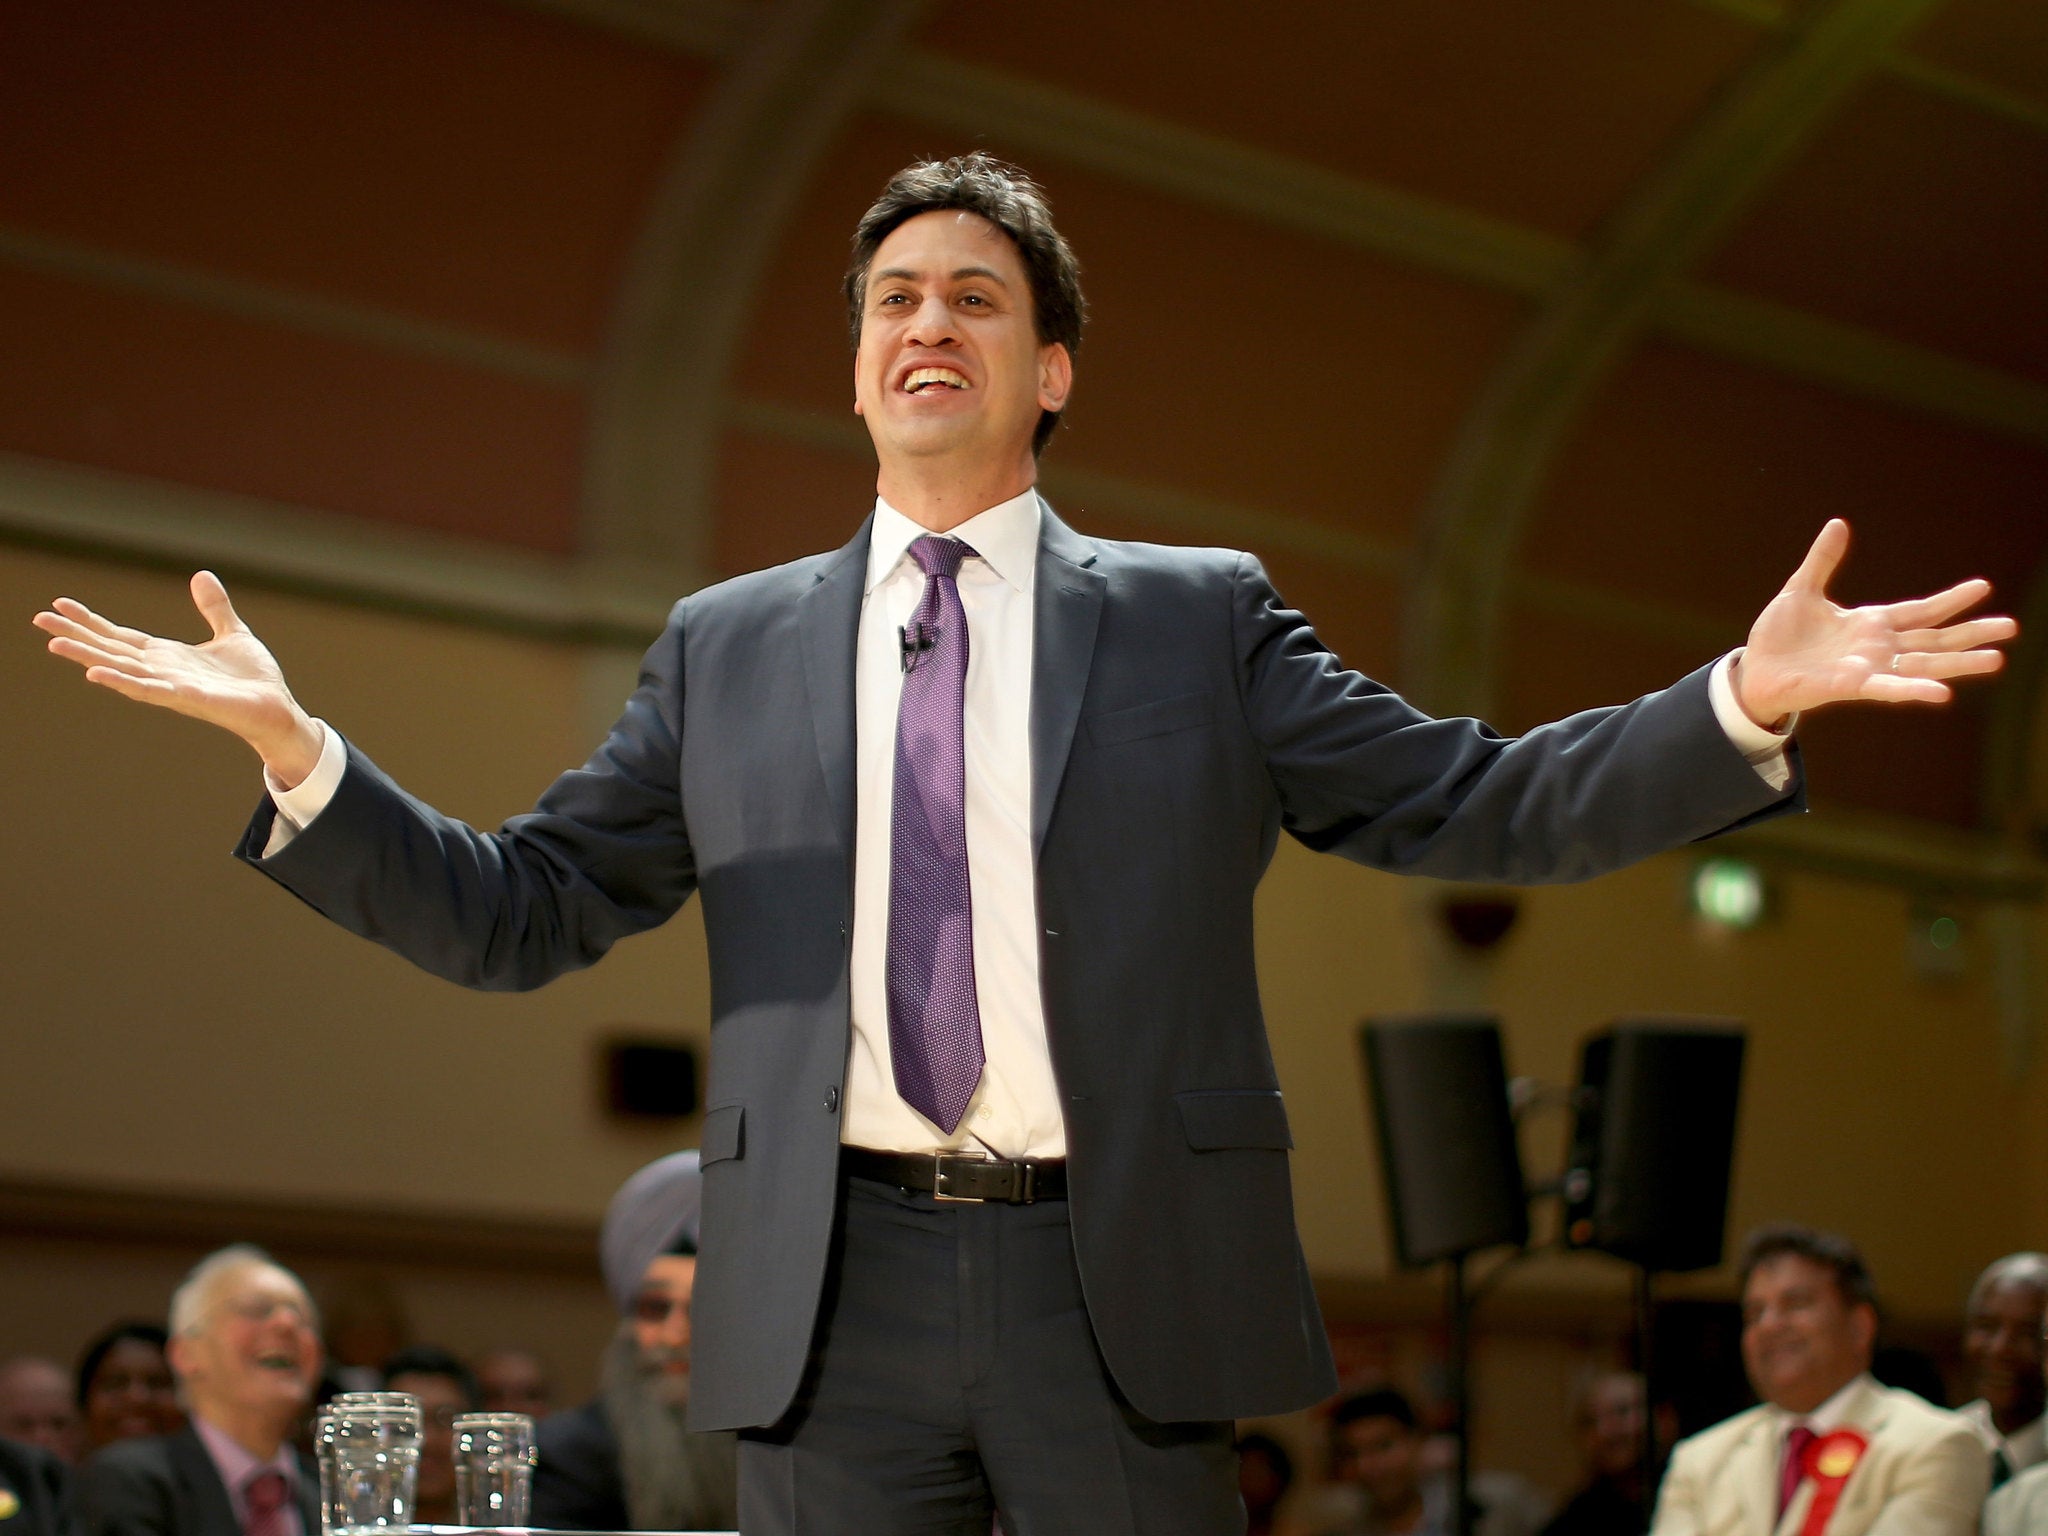 Labour Party Leader Ed Miliband speaks to supporters at Bloxwich Leisure Centre on May 19, 2014 in Walsall, England.